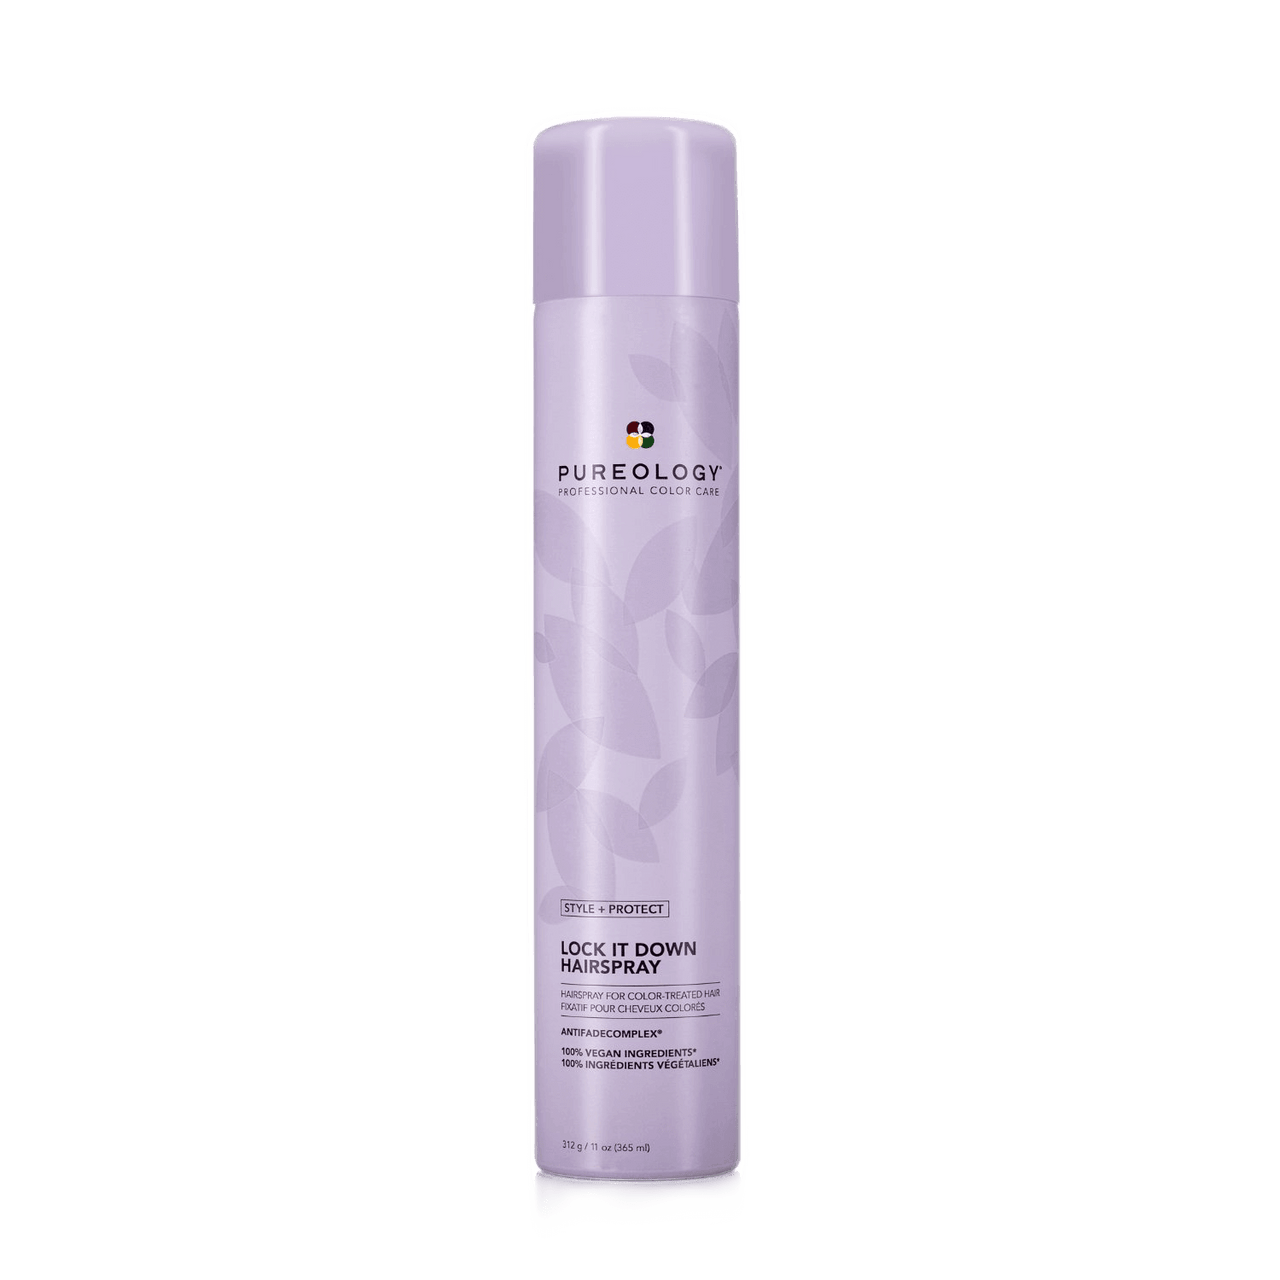 Pureology Style + Protect Lock It Down Hairspray 312 g